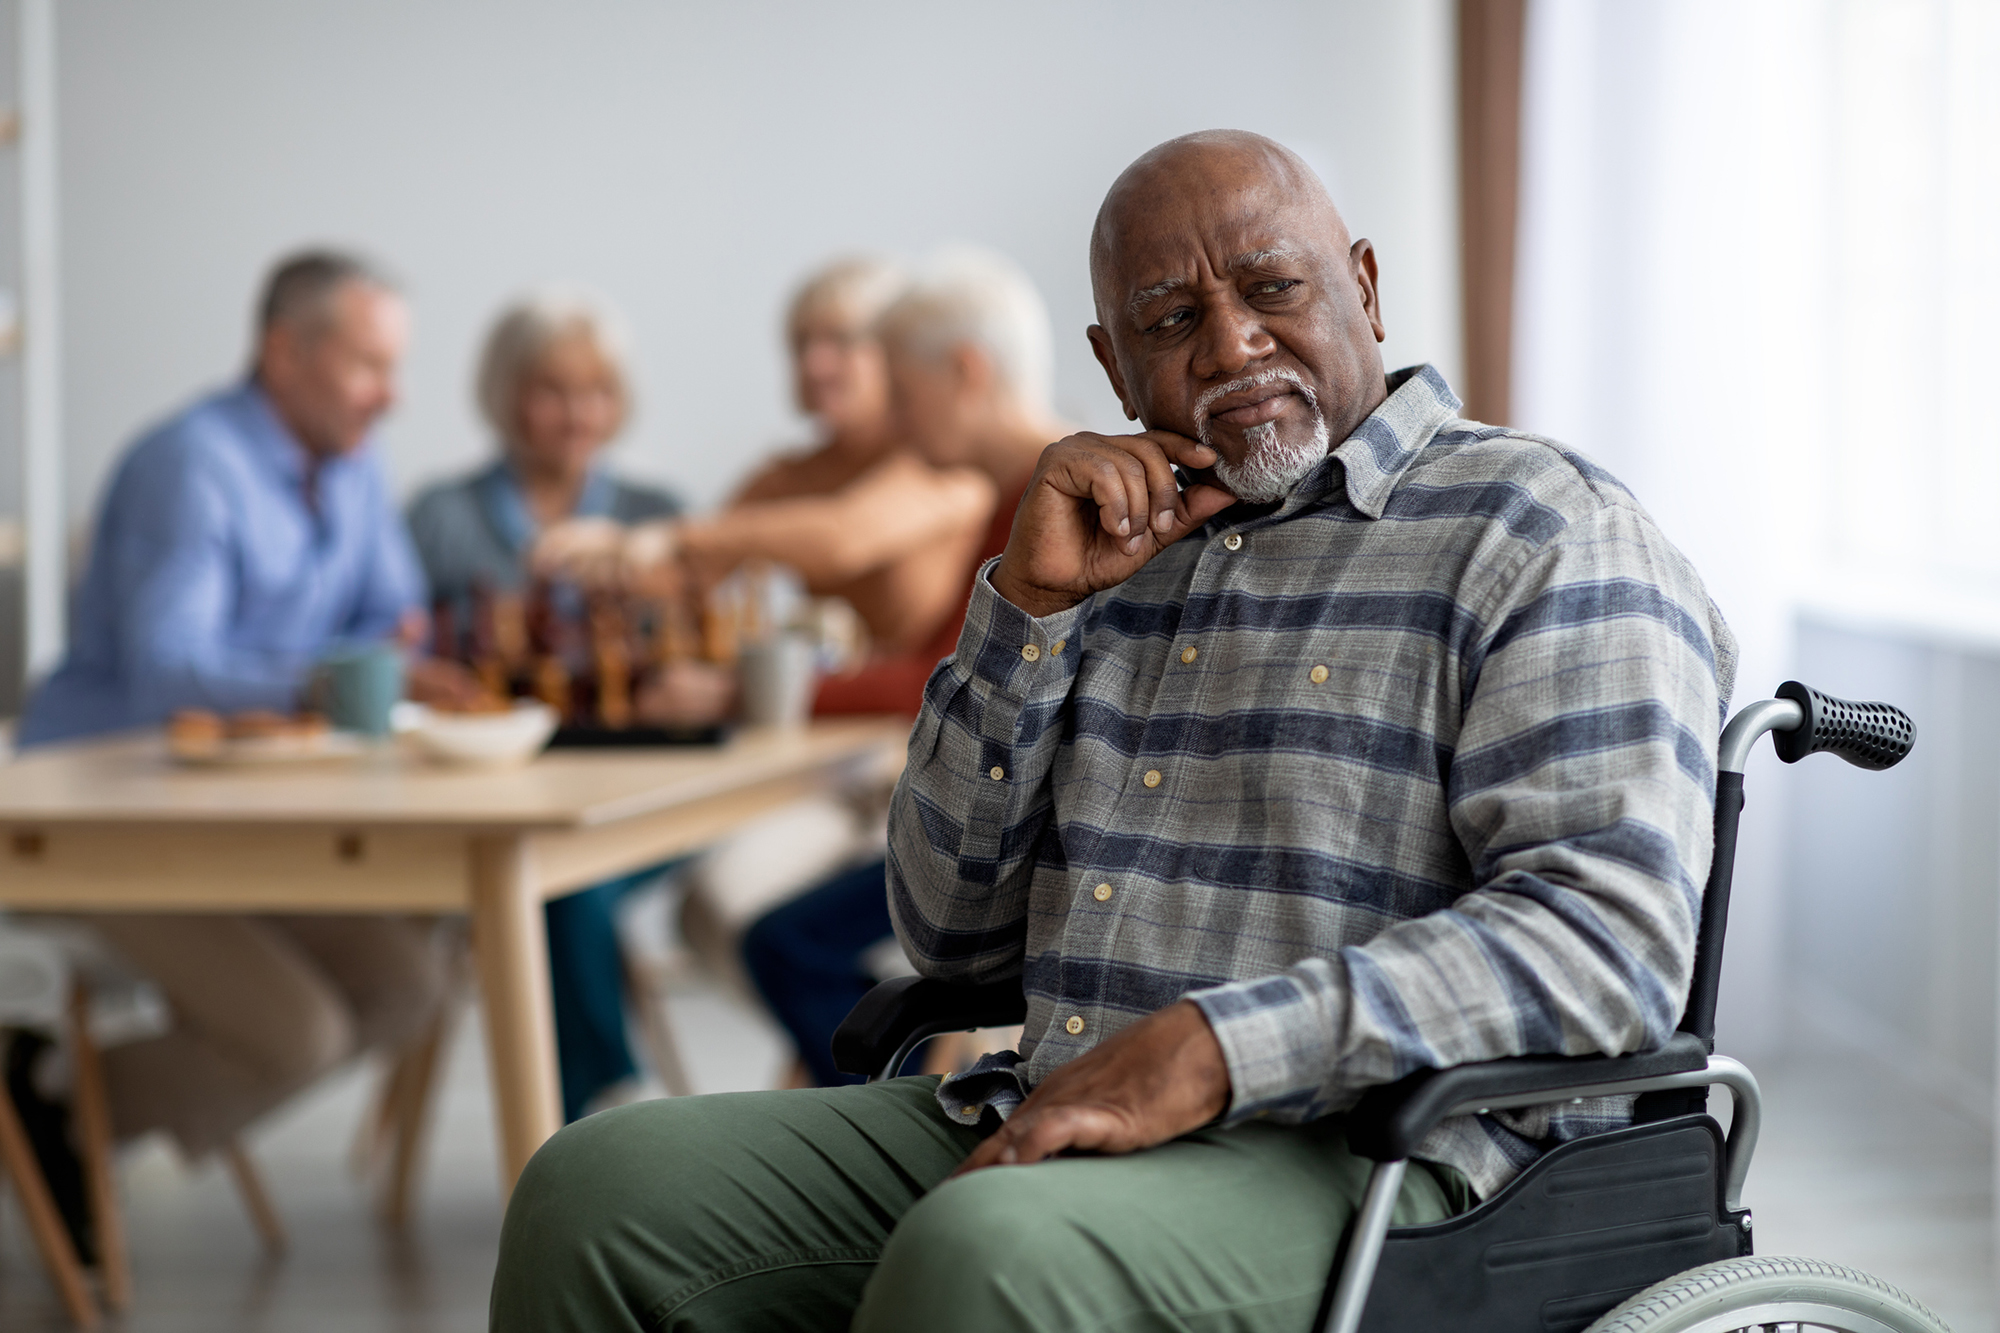 African American senior citizen in a wheelchair with a group of people in the background playing a game.